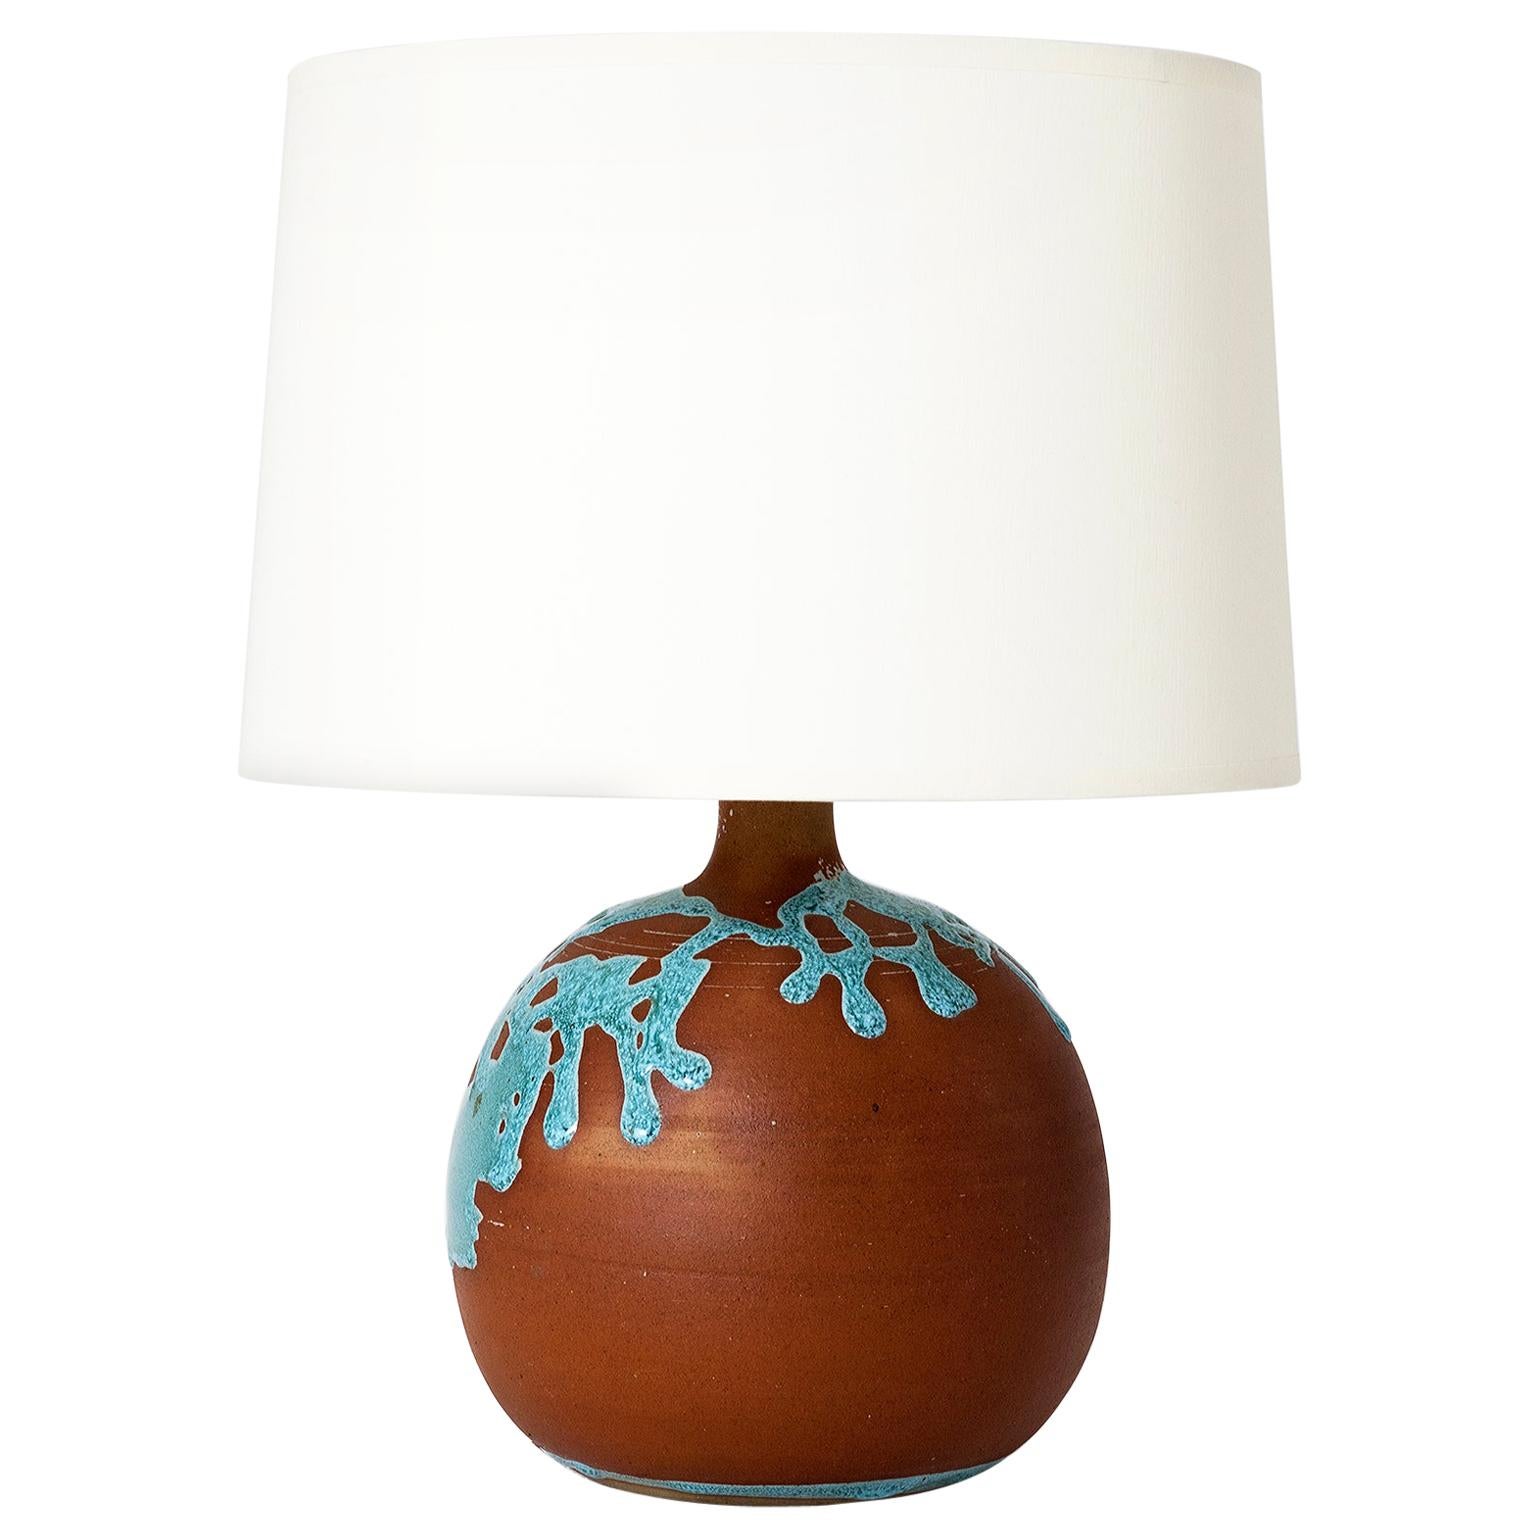 French 1960s Terracotta and Turquoise Glaze Table Lamp